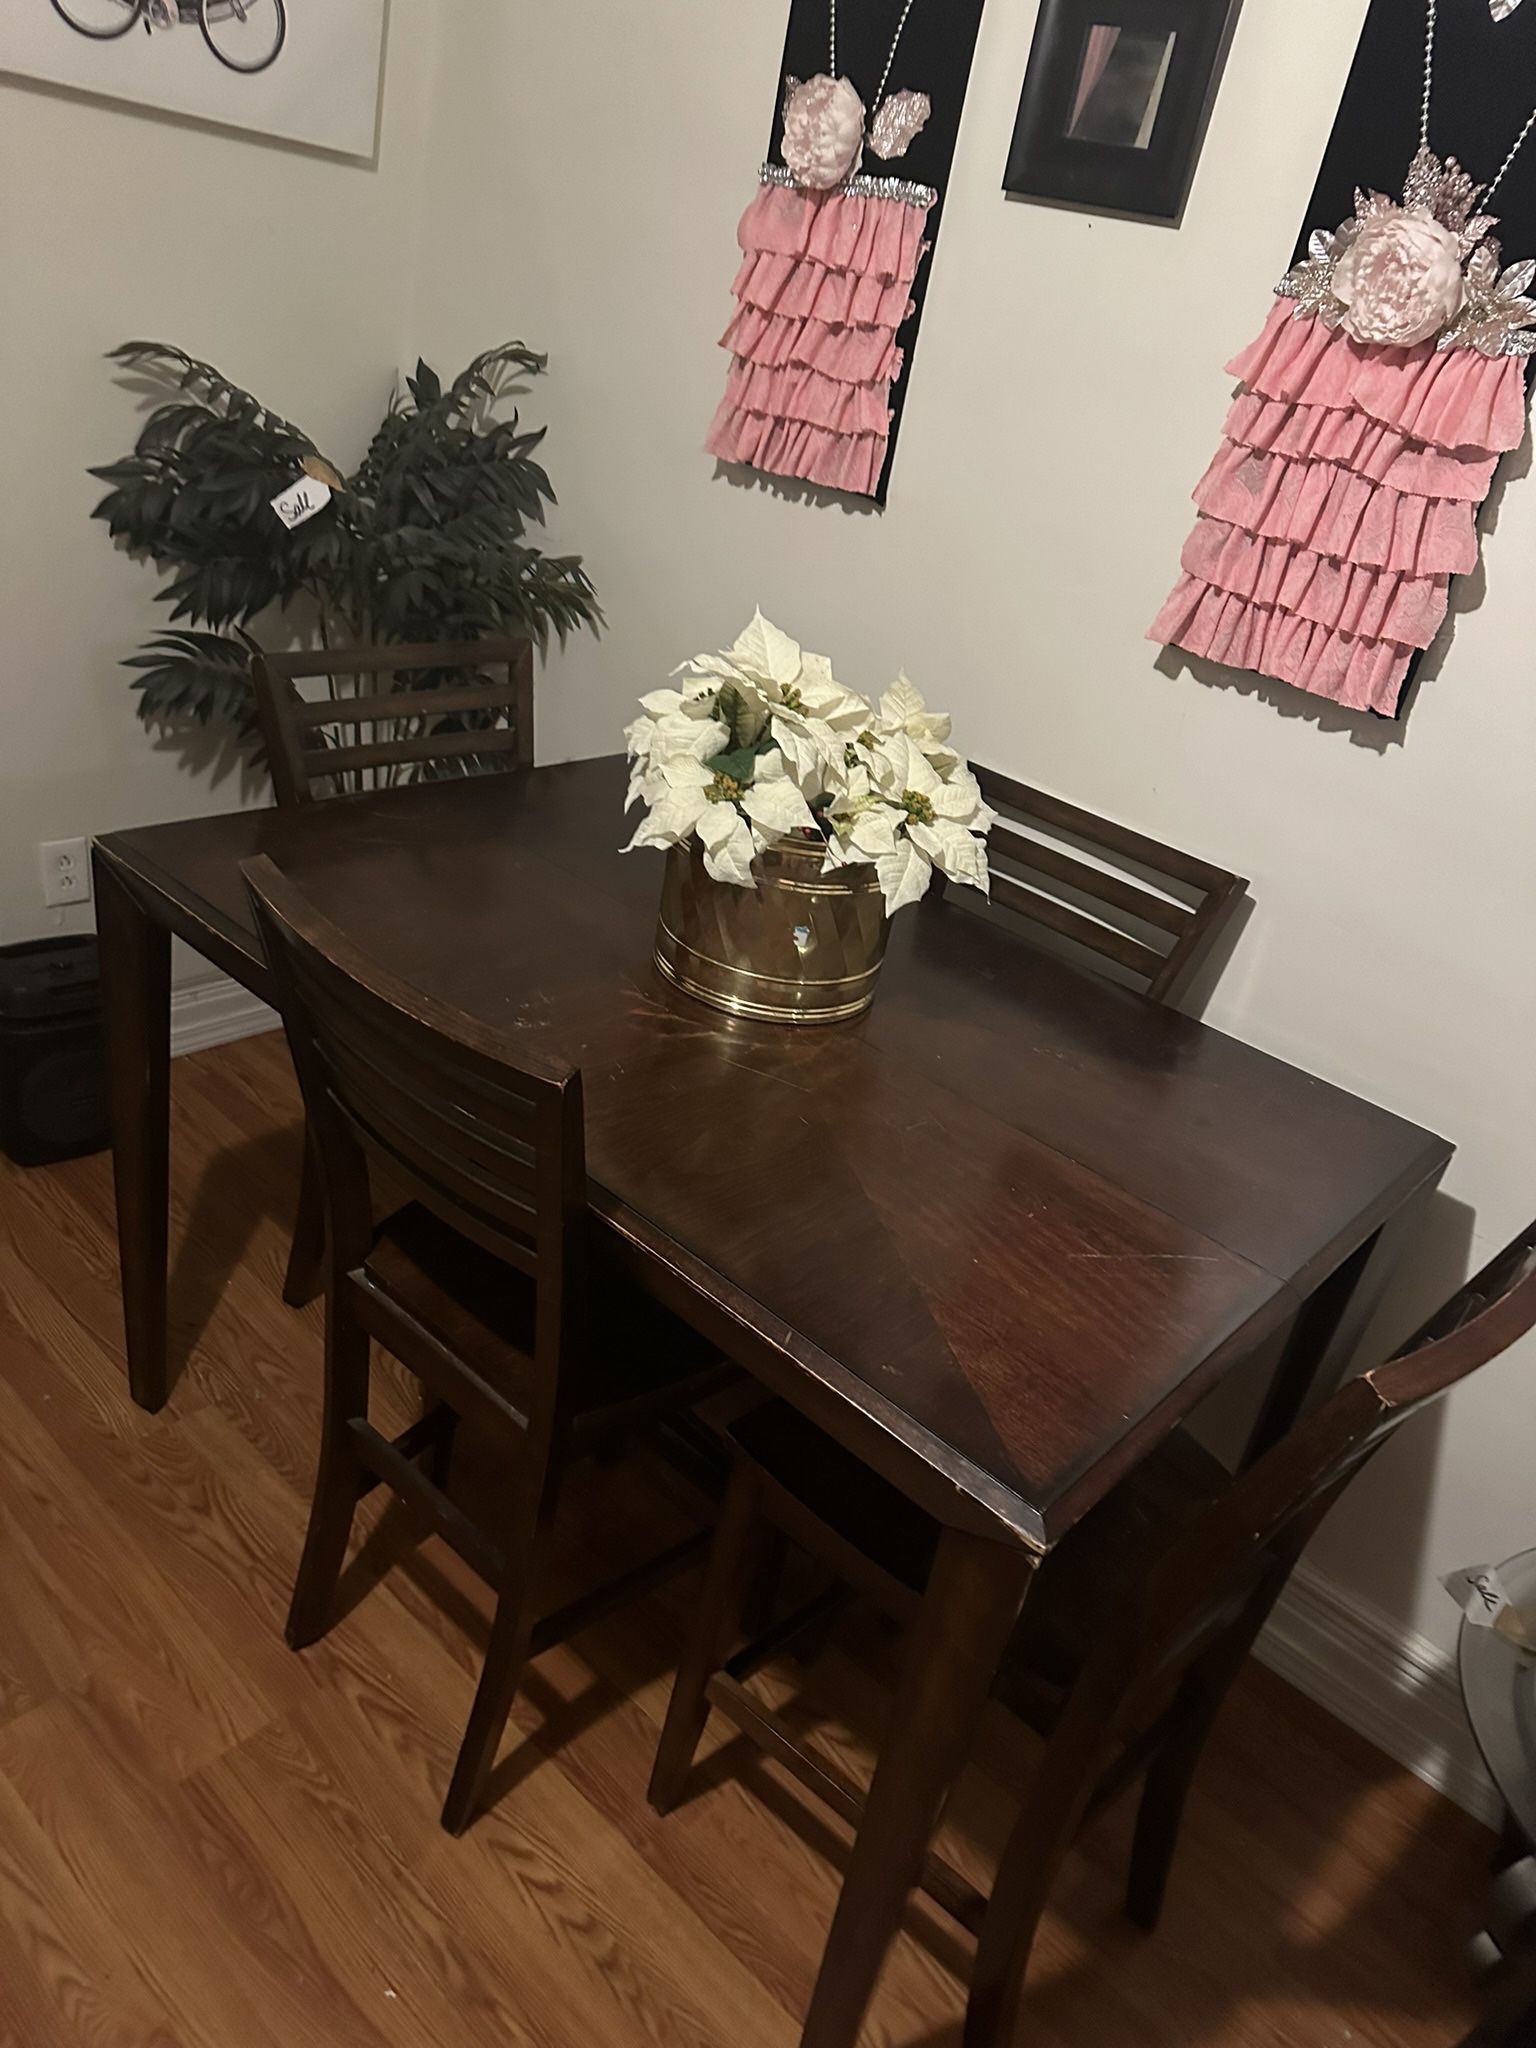 Dinette , the table length is 4'3" The width is 34 inches The height of the table is 2 1/2 feet.  